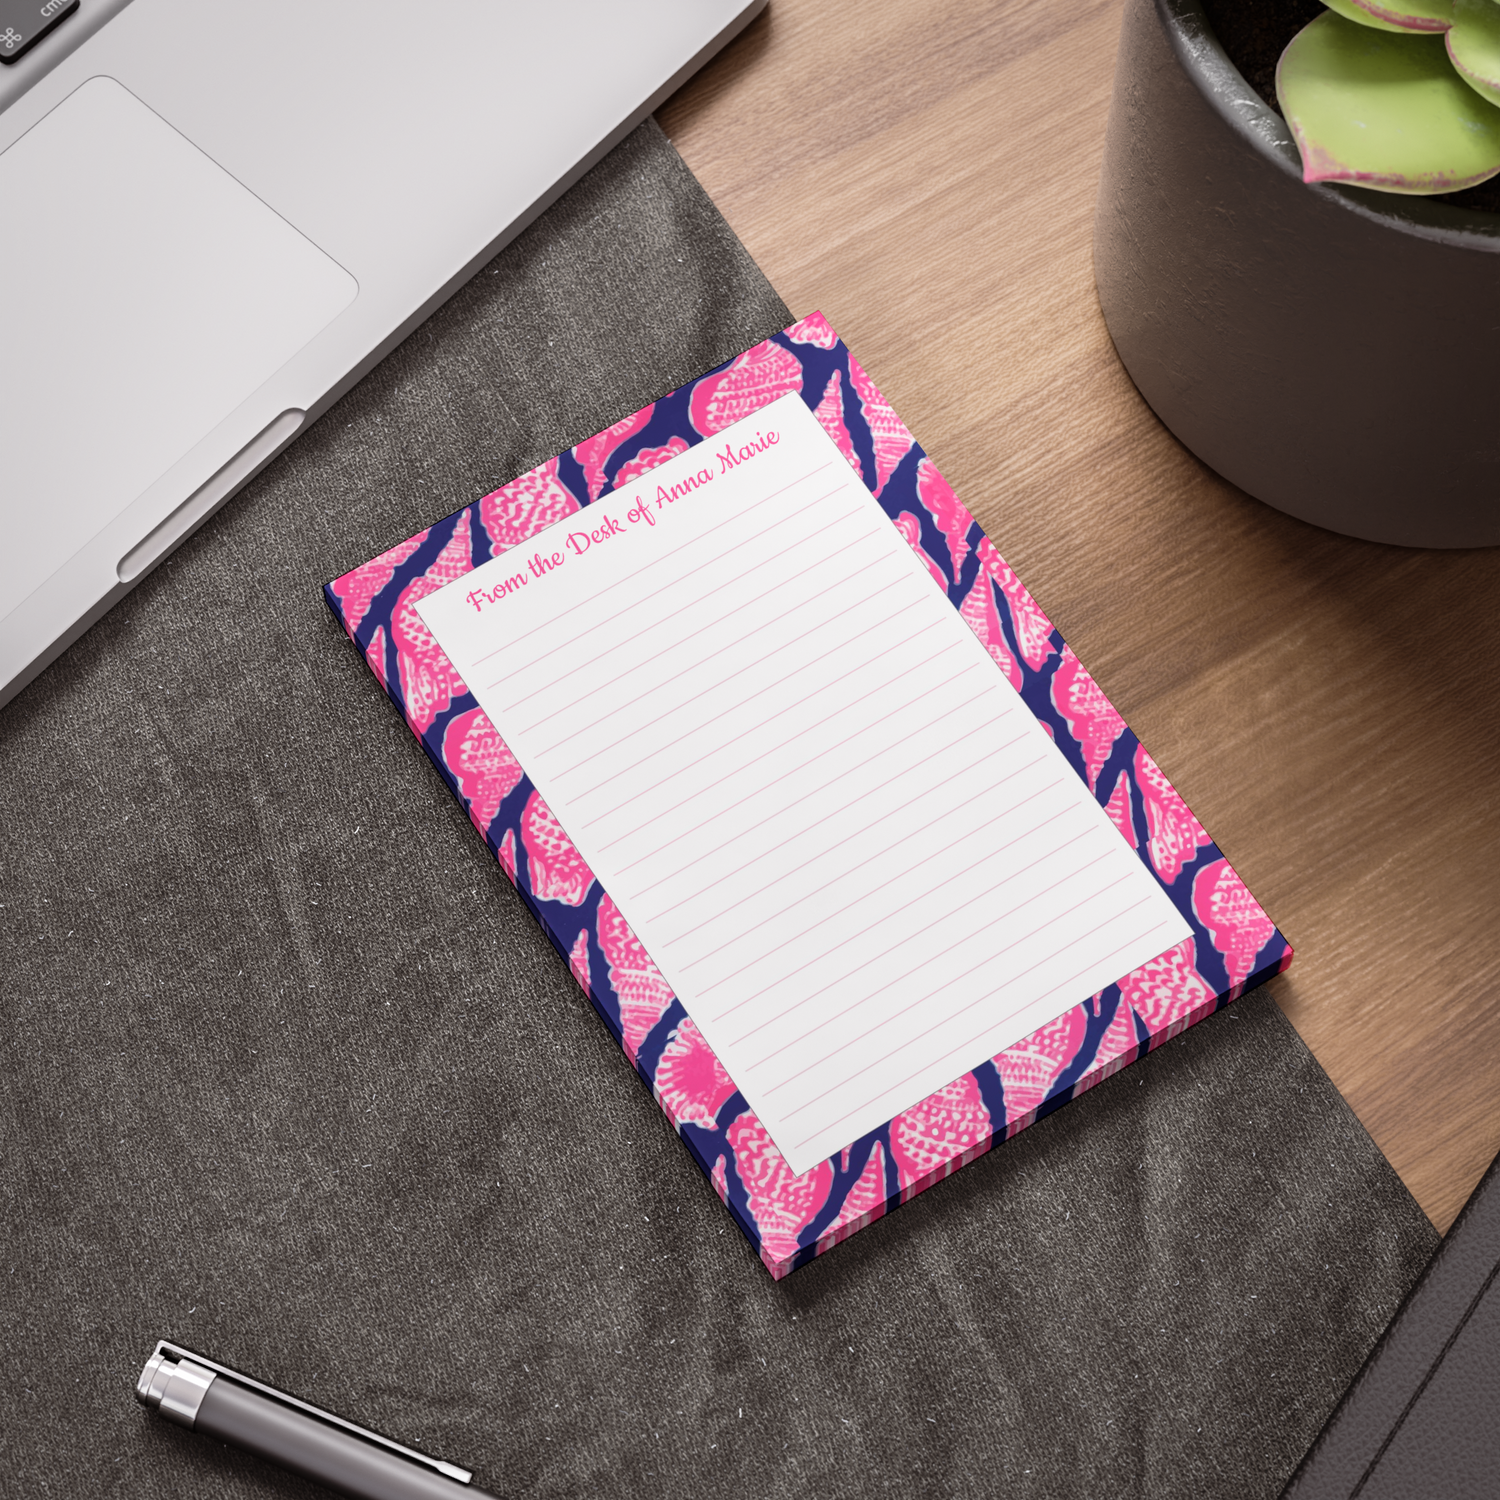 Patterned Customized 'From the Desk of' Post-It® Pads